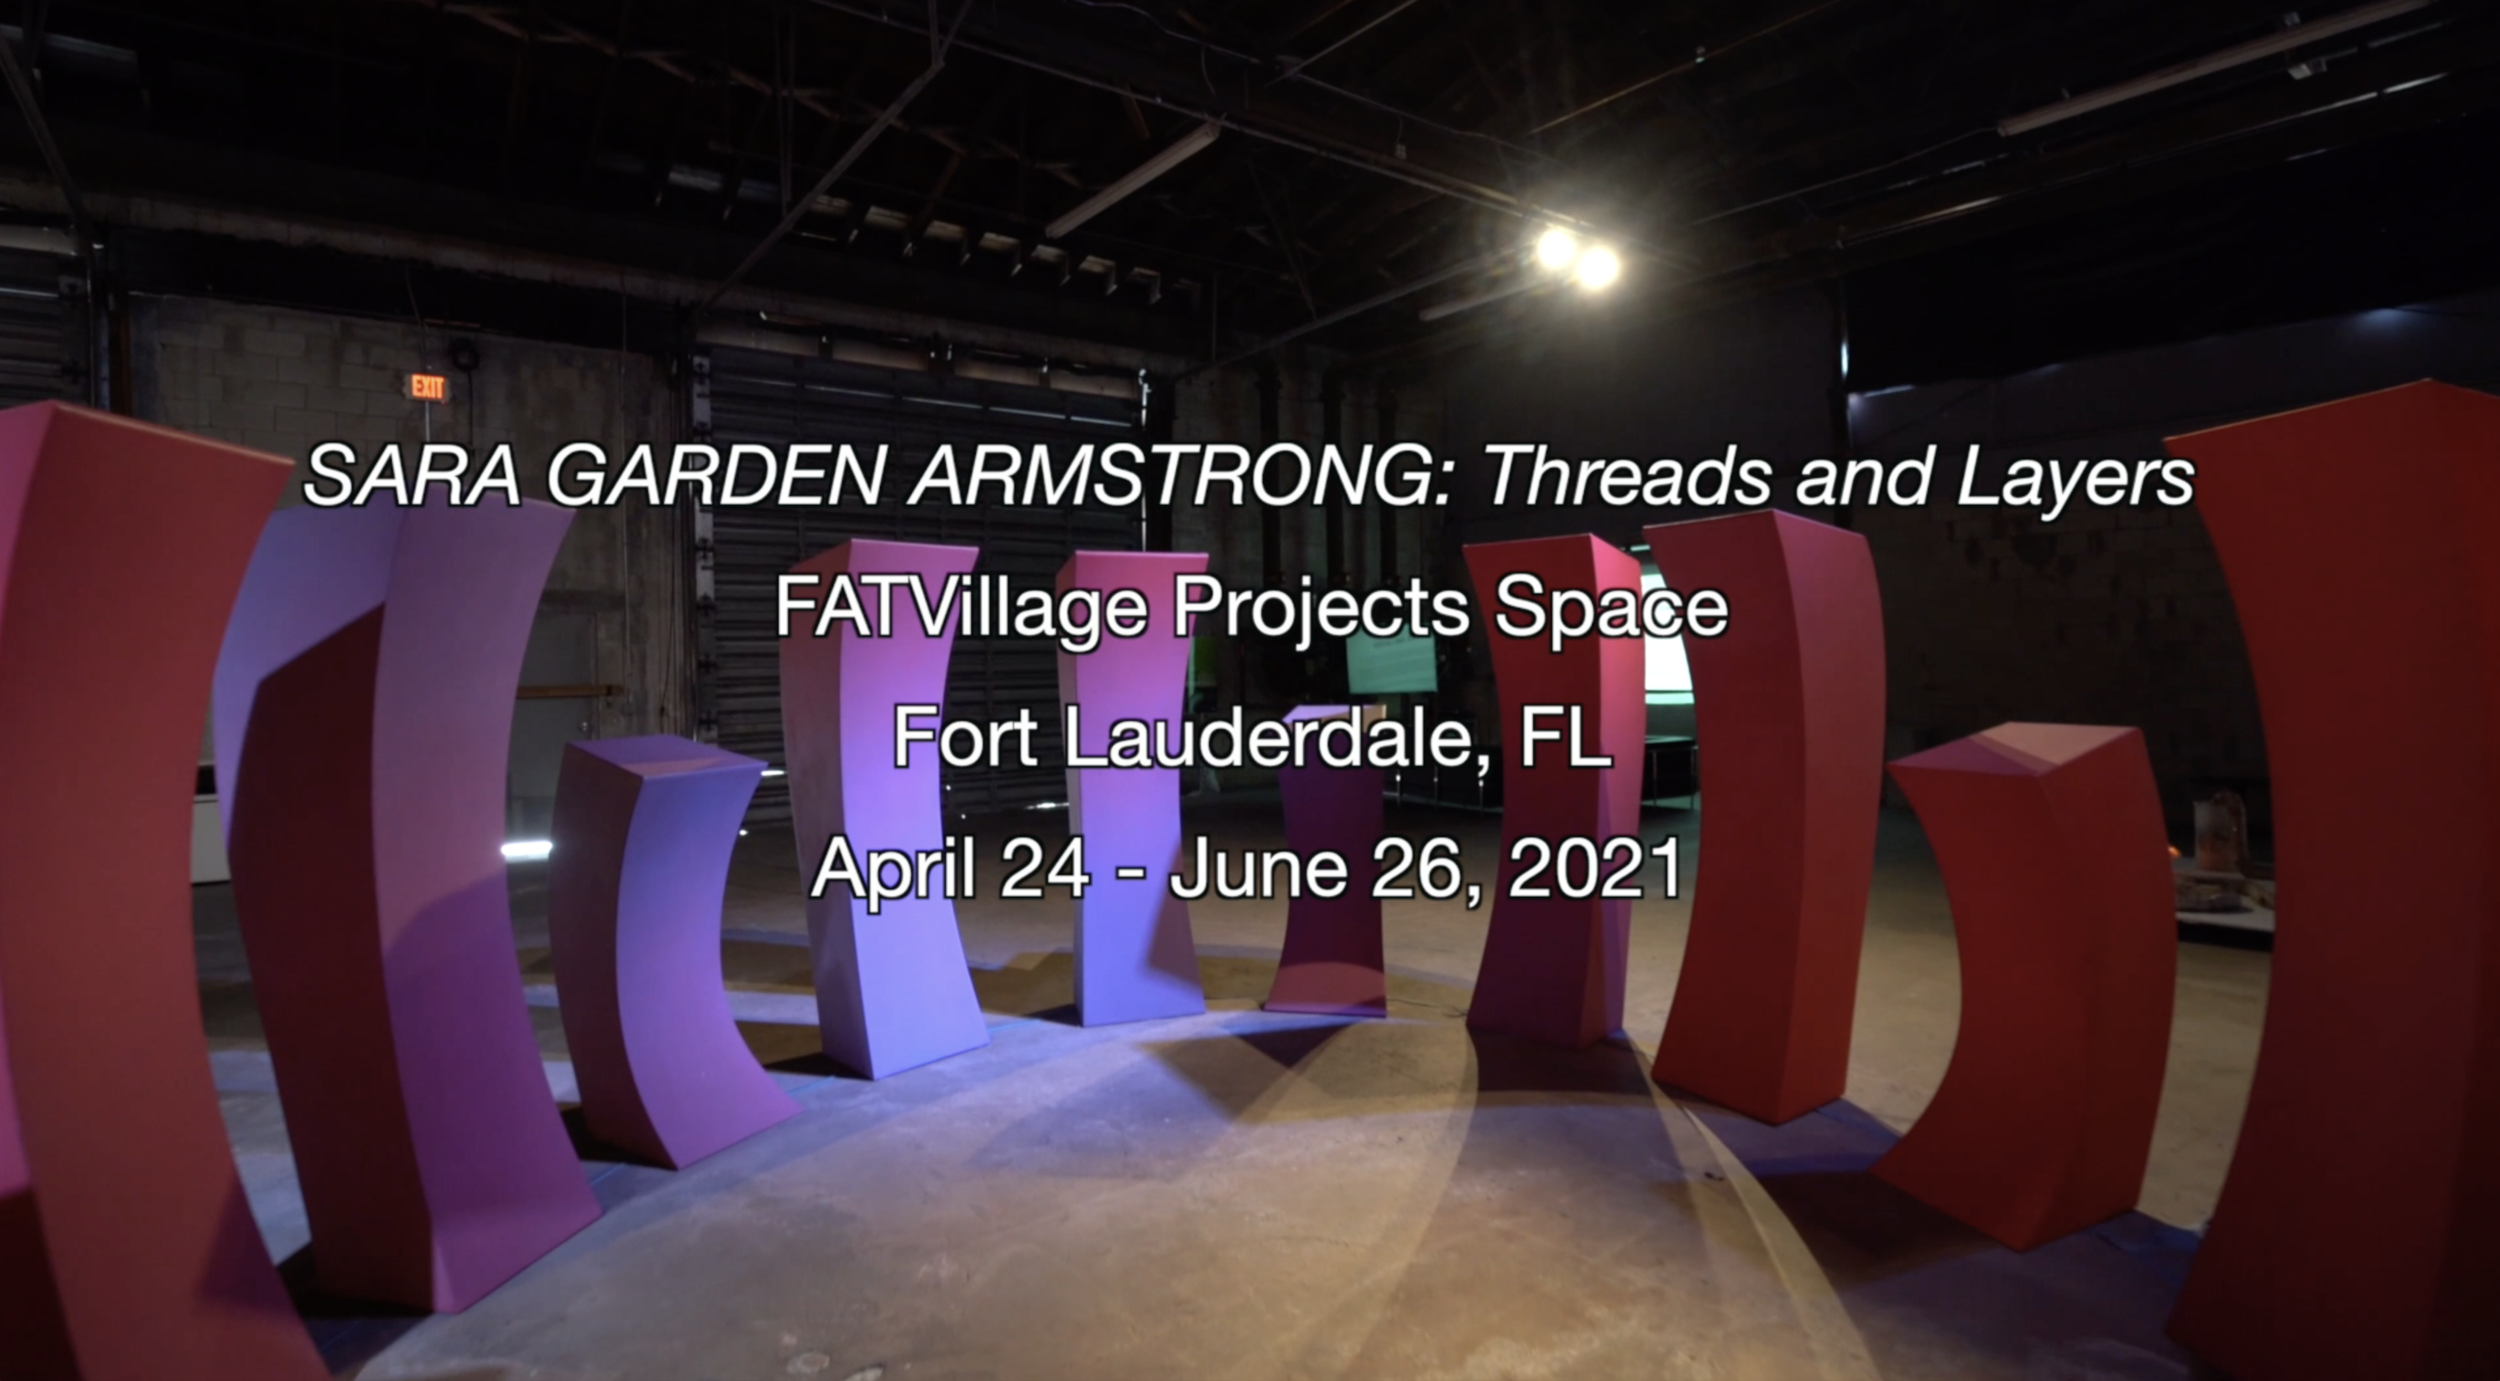 Sara Garden Armstrong: Threads and Layers, FATVillage